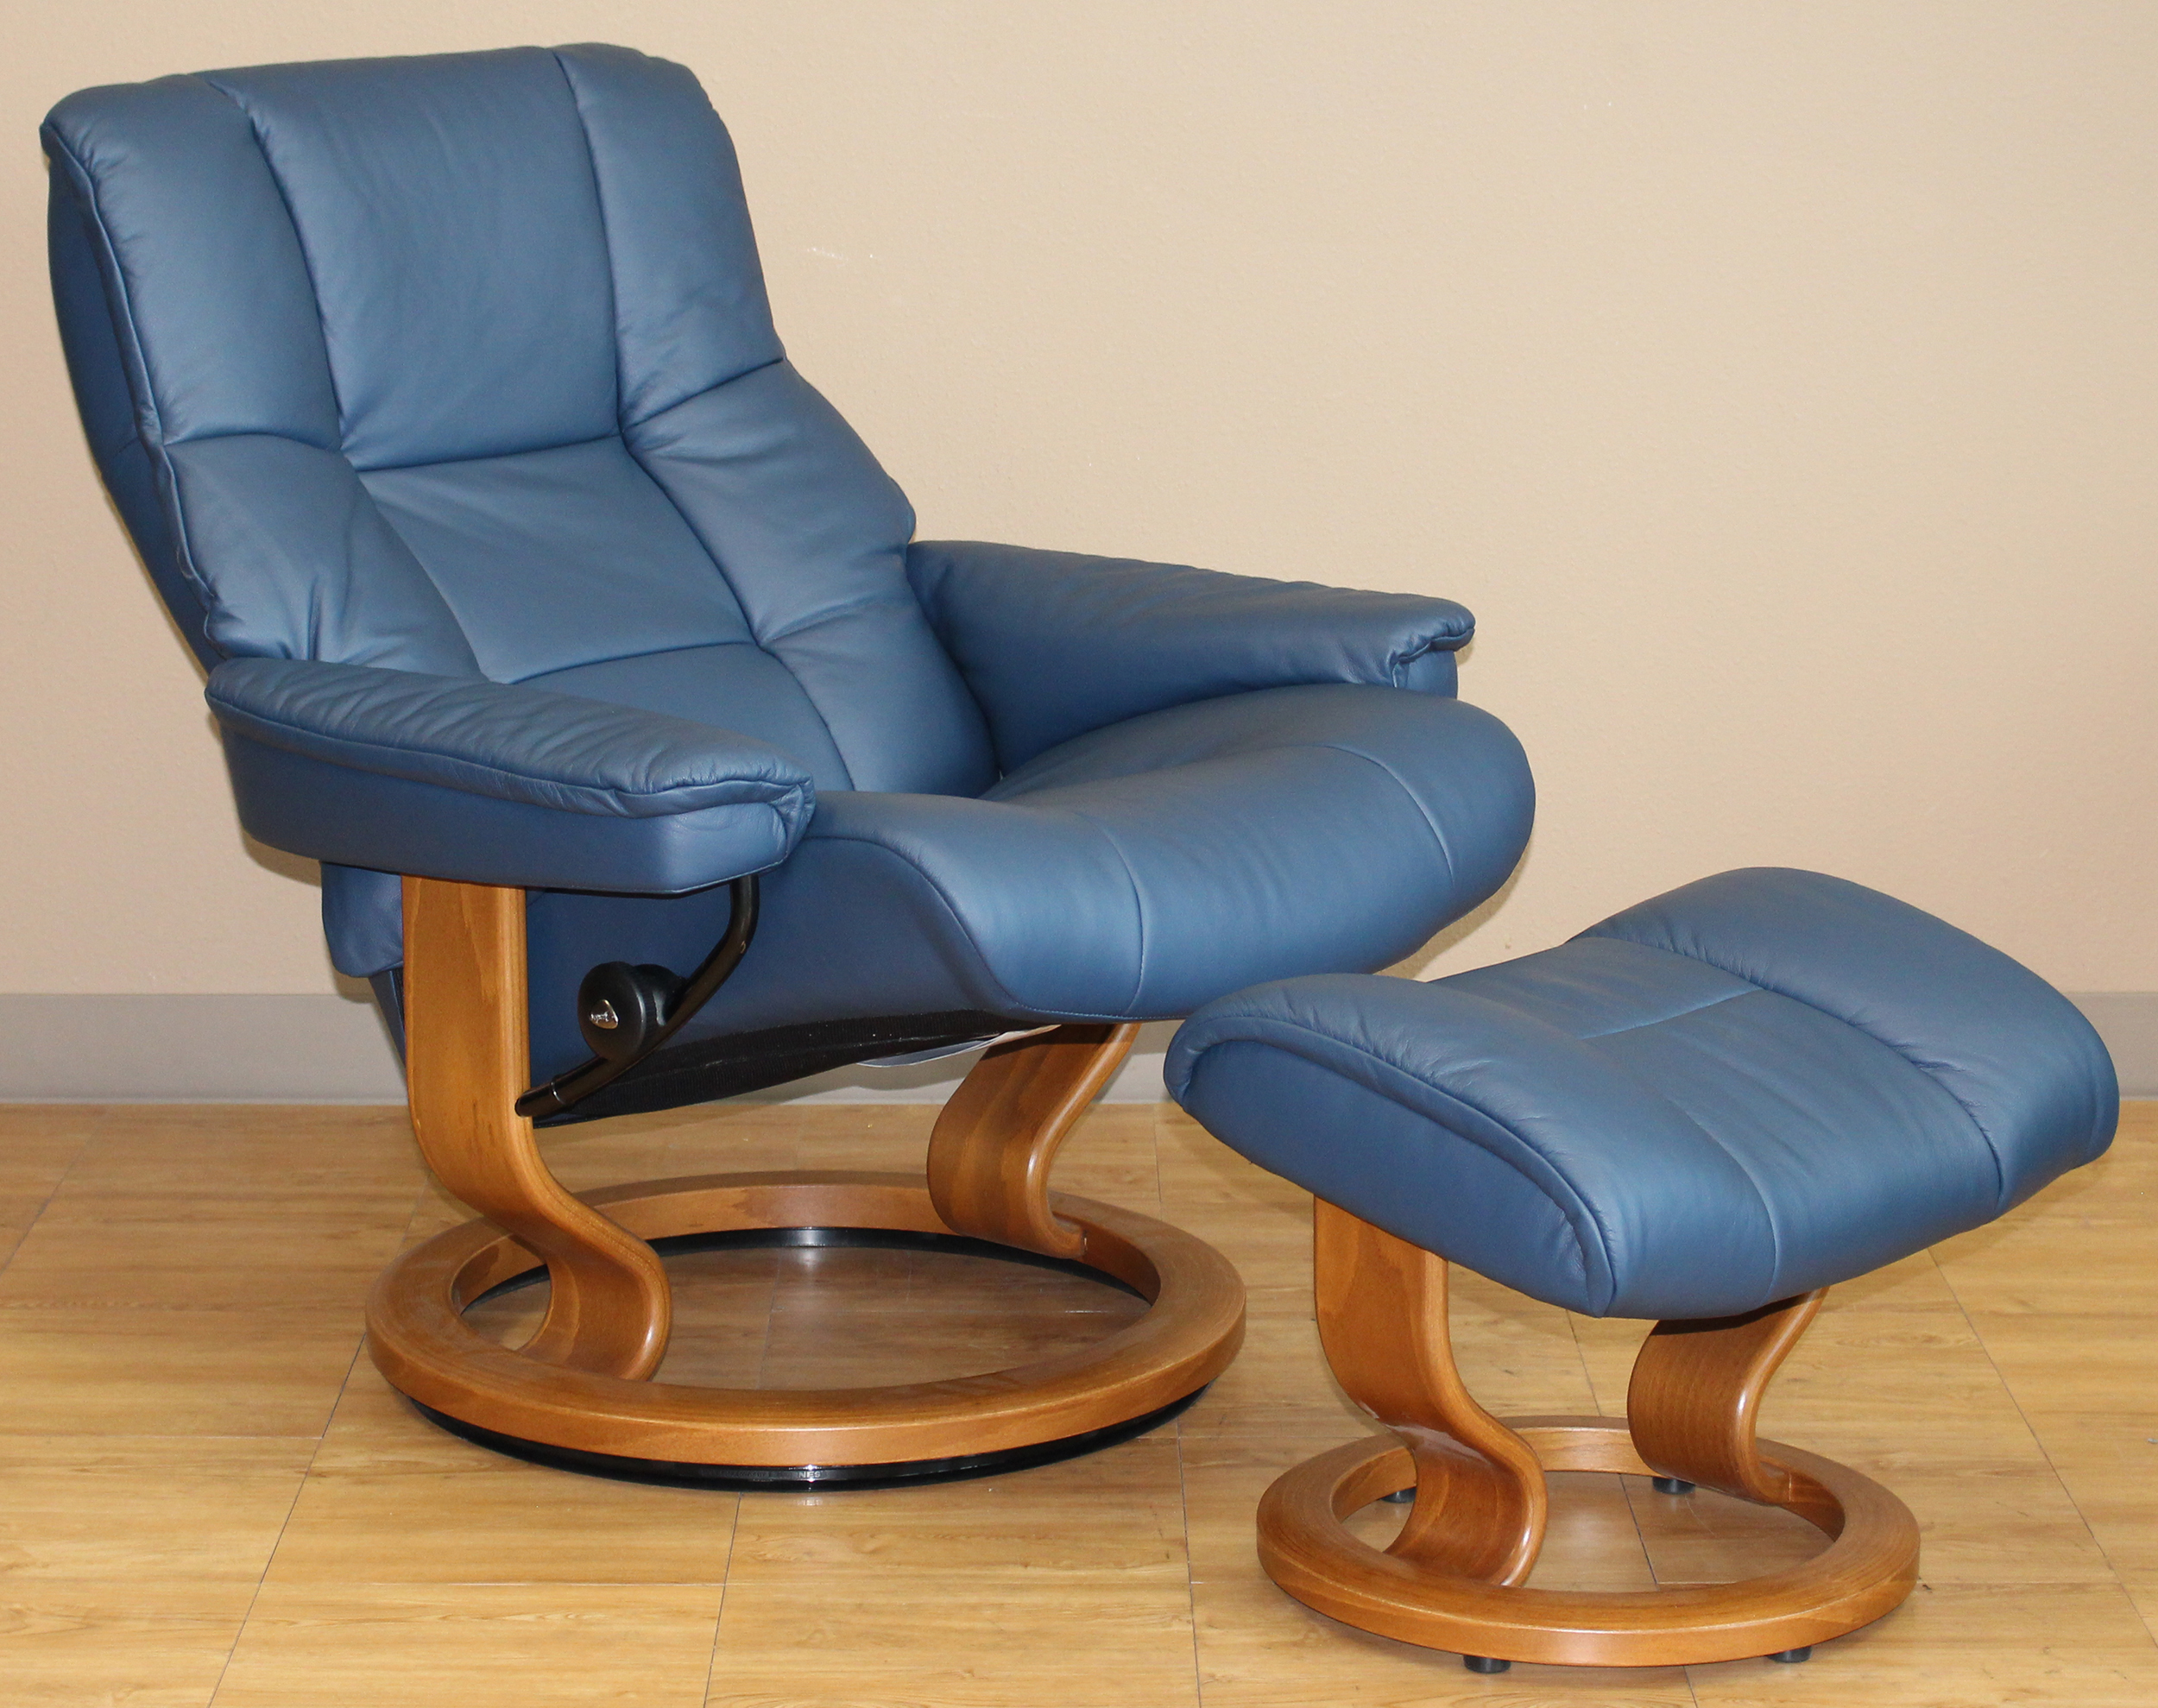 Stressless Mayfair Paloma Oxford Blue Leather Recliner Chair And